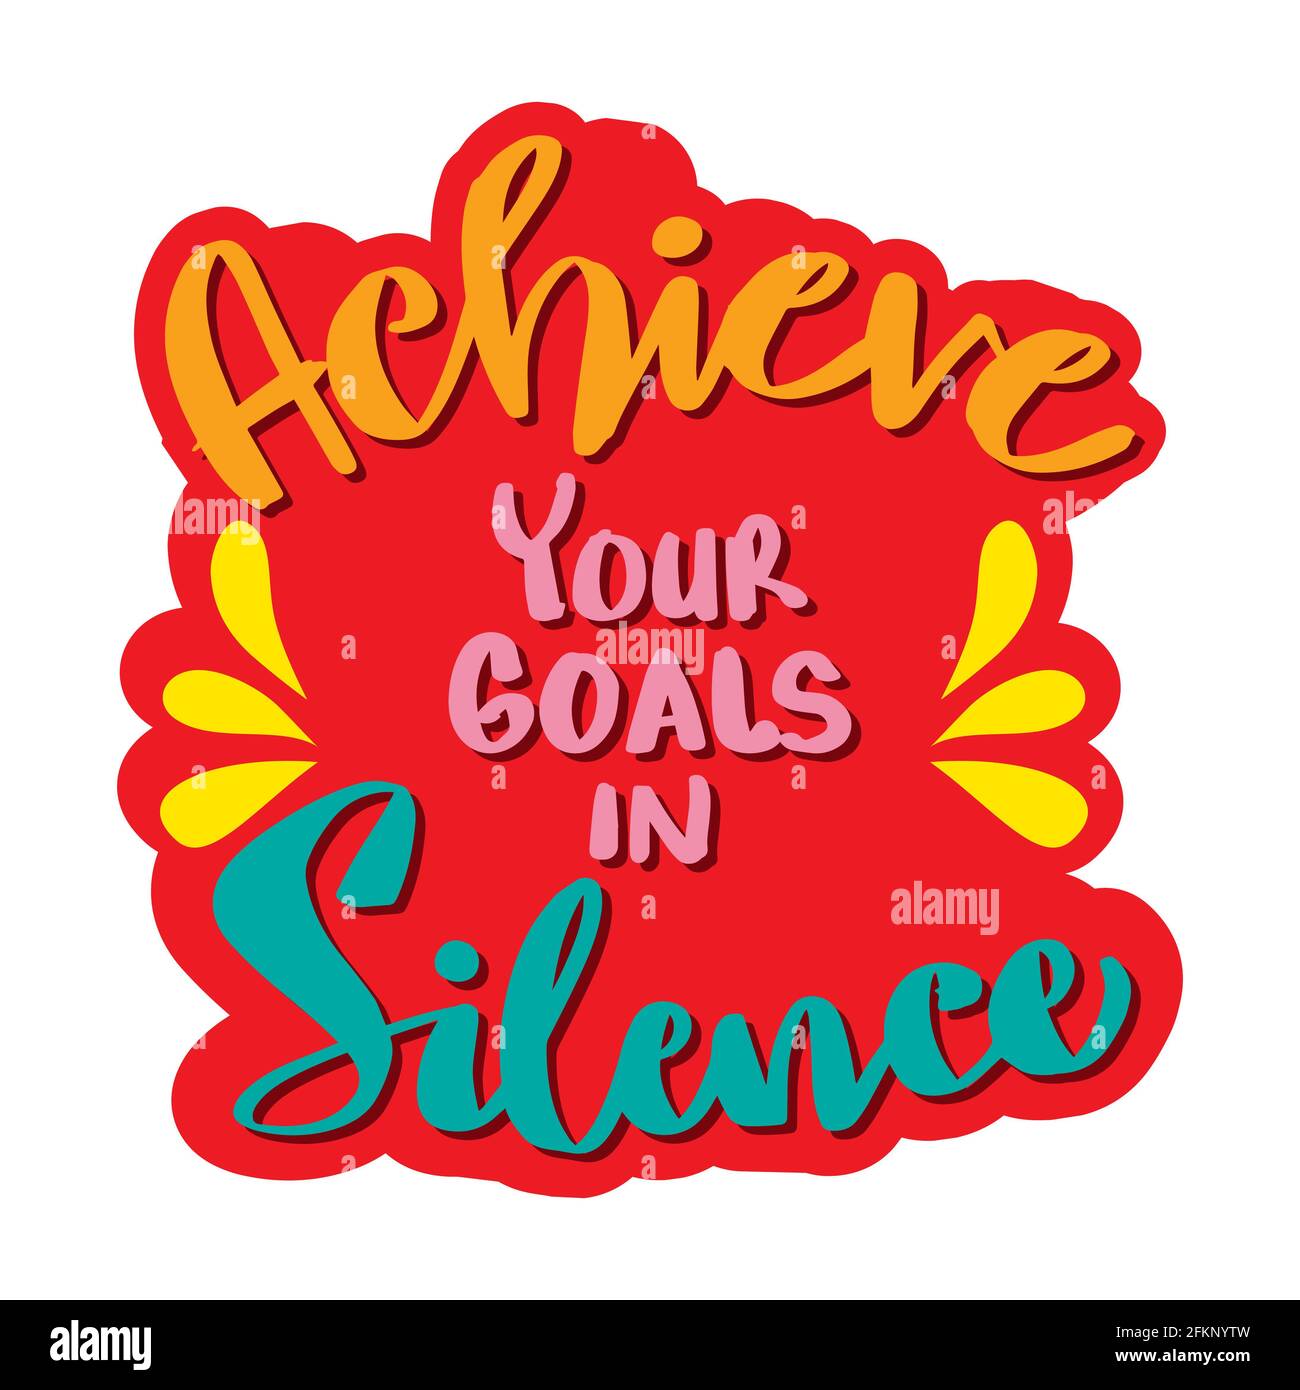 Achieve your goal in silence. Islamic quotes. Stock Photo